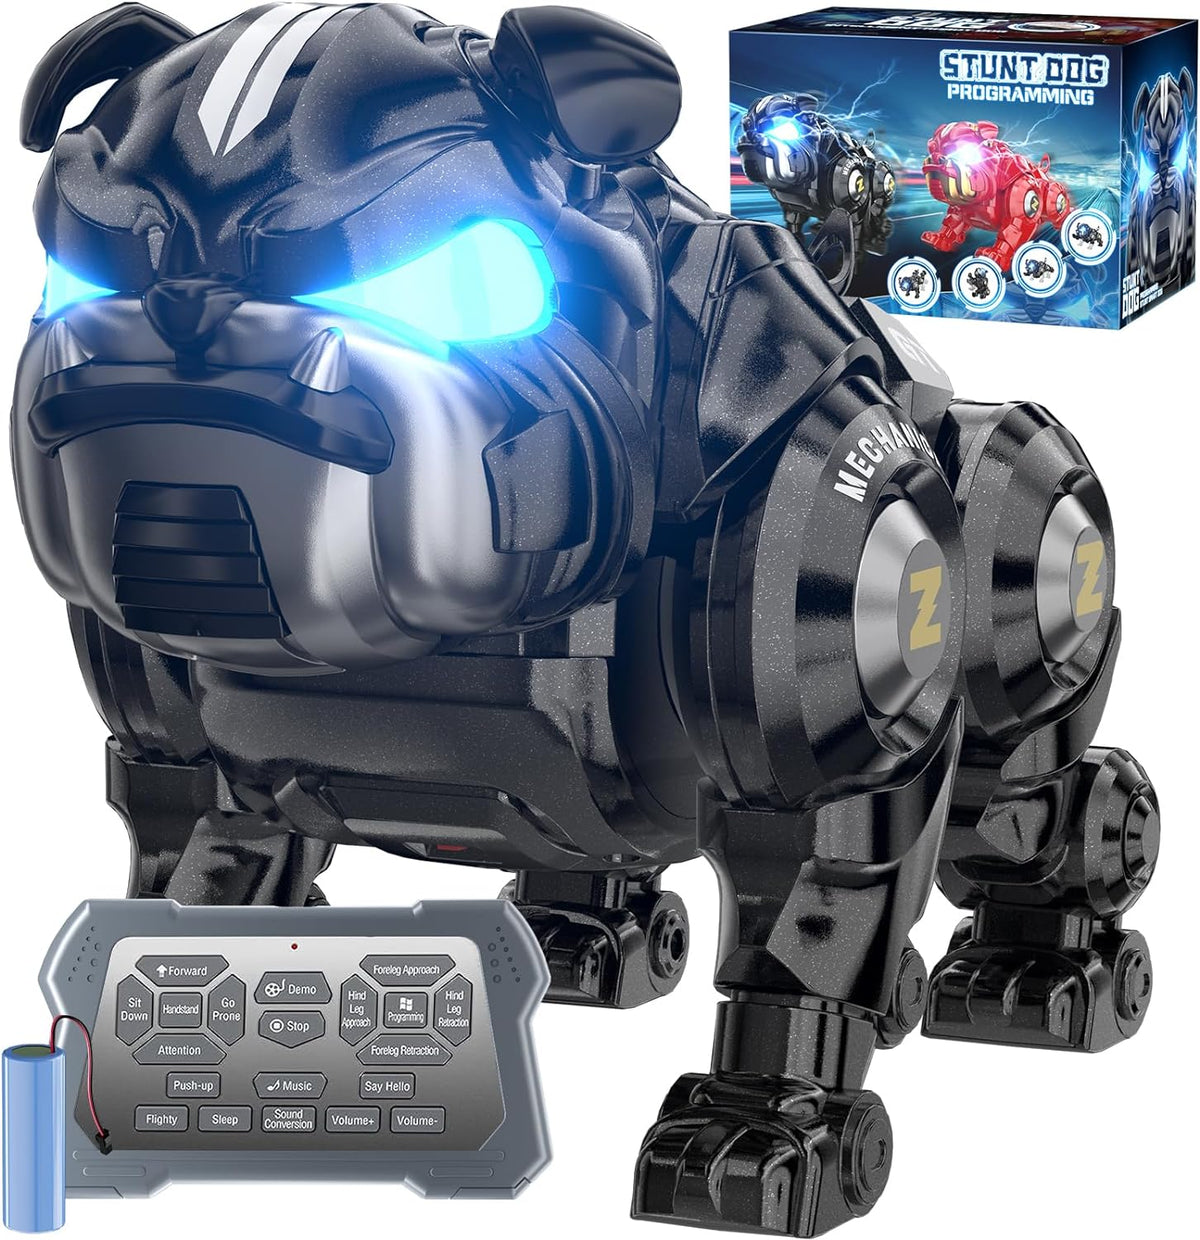 Blkont Remote Control Robot Dog Toys for Boys, Rechargeable Programmable Stunt Robot Dog with Singing, Dancing and Touch Functions for Boys Ages 3 4 5 6 7 8 9 10+ Christmas & Birthday Gifts (Black) - Cykapu